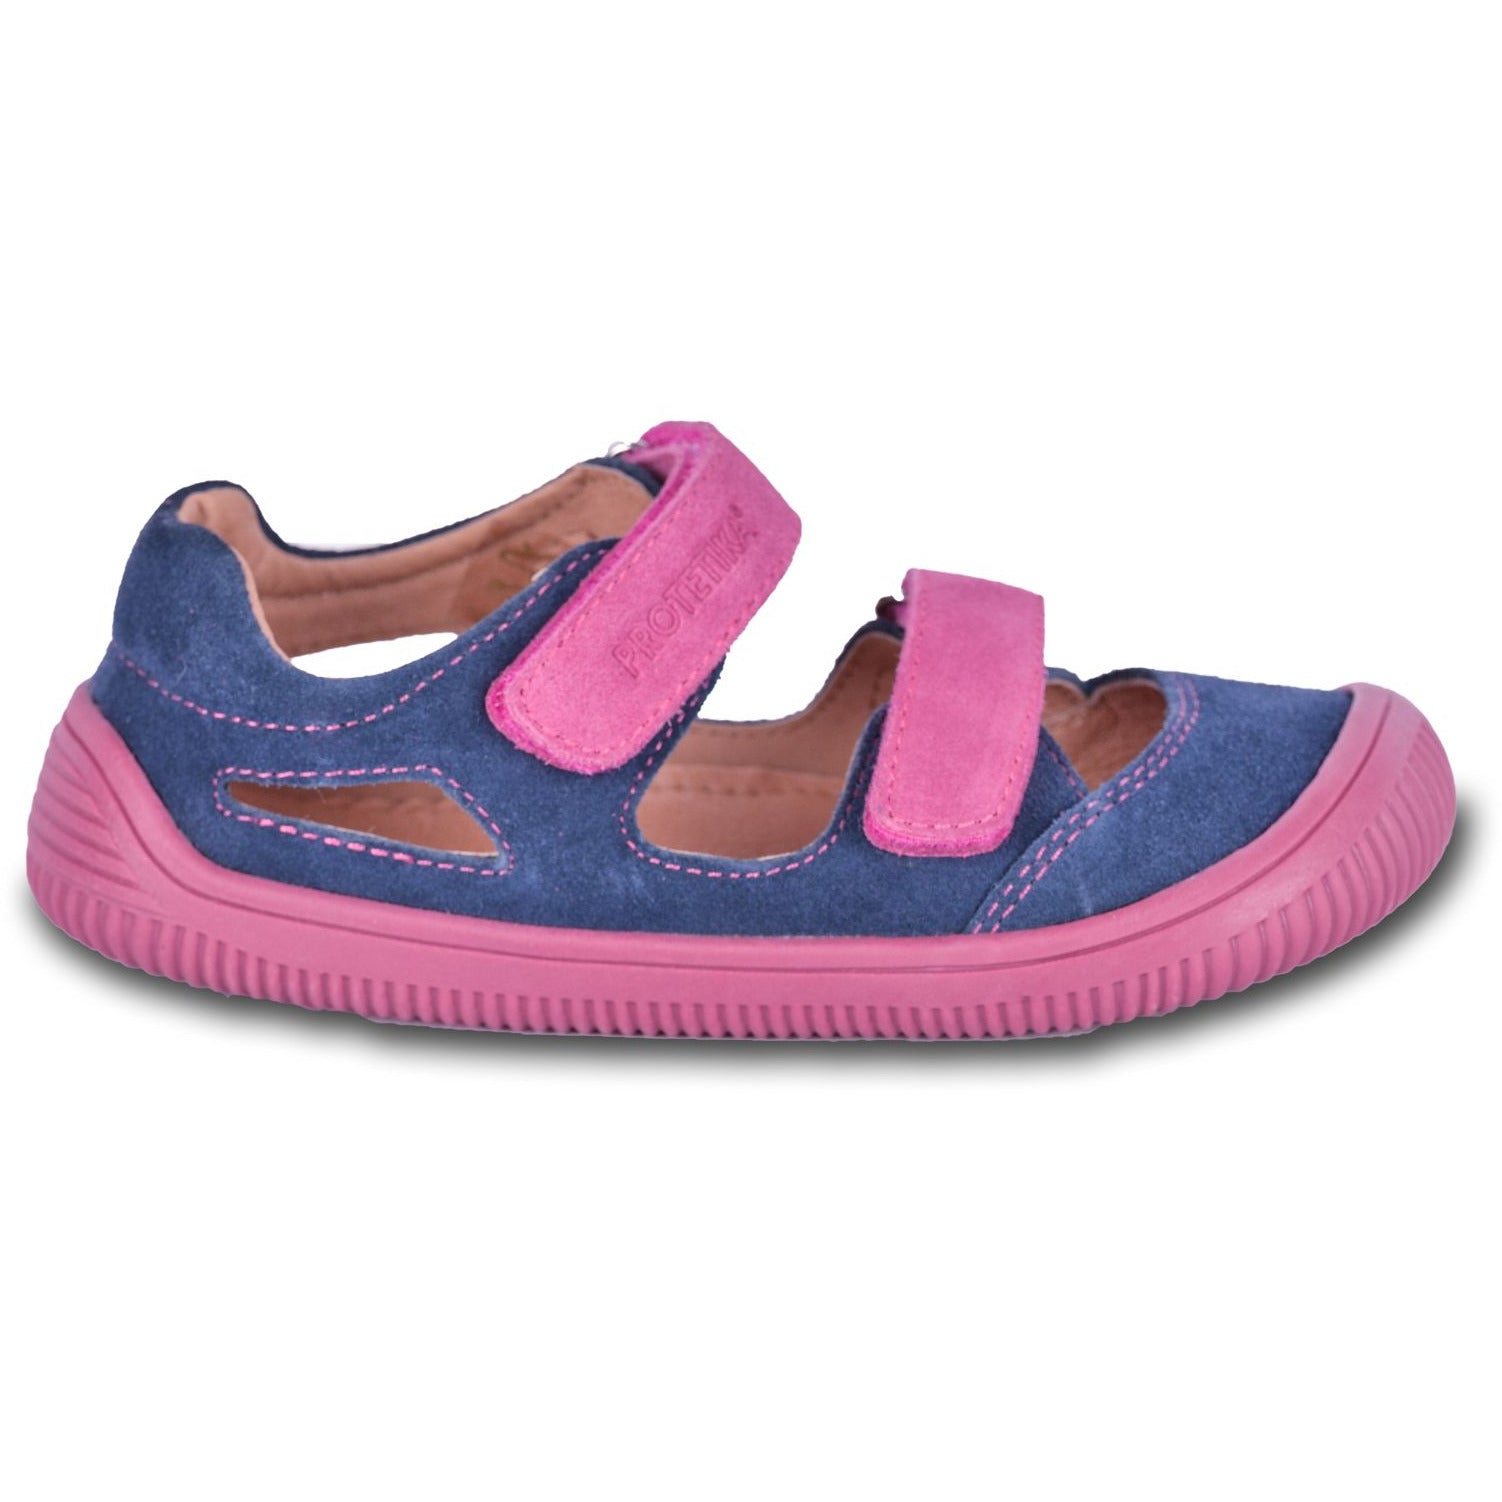 An eye catching blue pink barefoot sneaker for older girls enables your girl to perceive the ground and develop the foot arch in a natural way. The heel counter is soft and not restricting the heel.